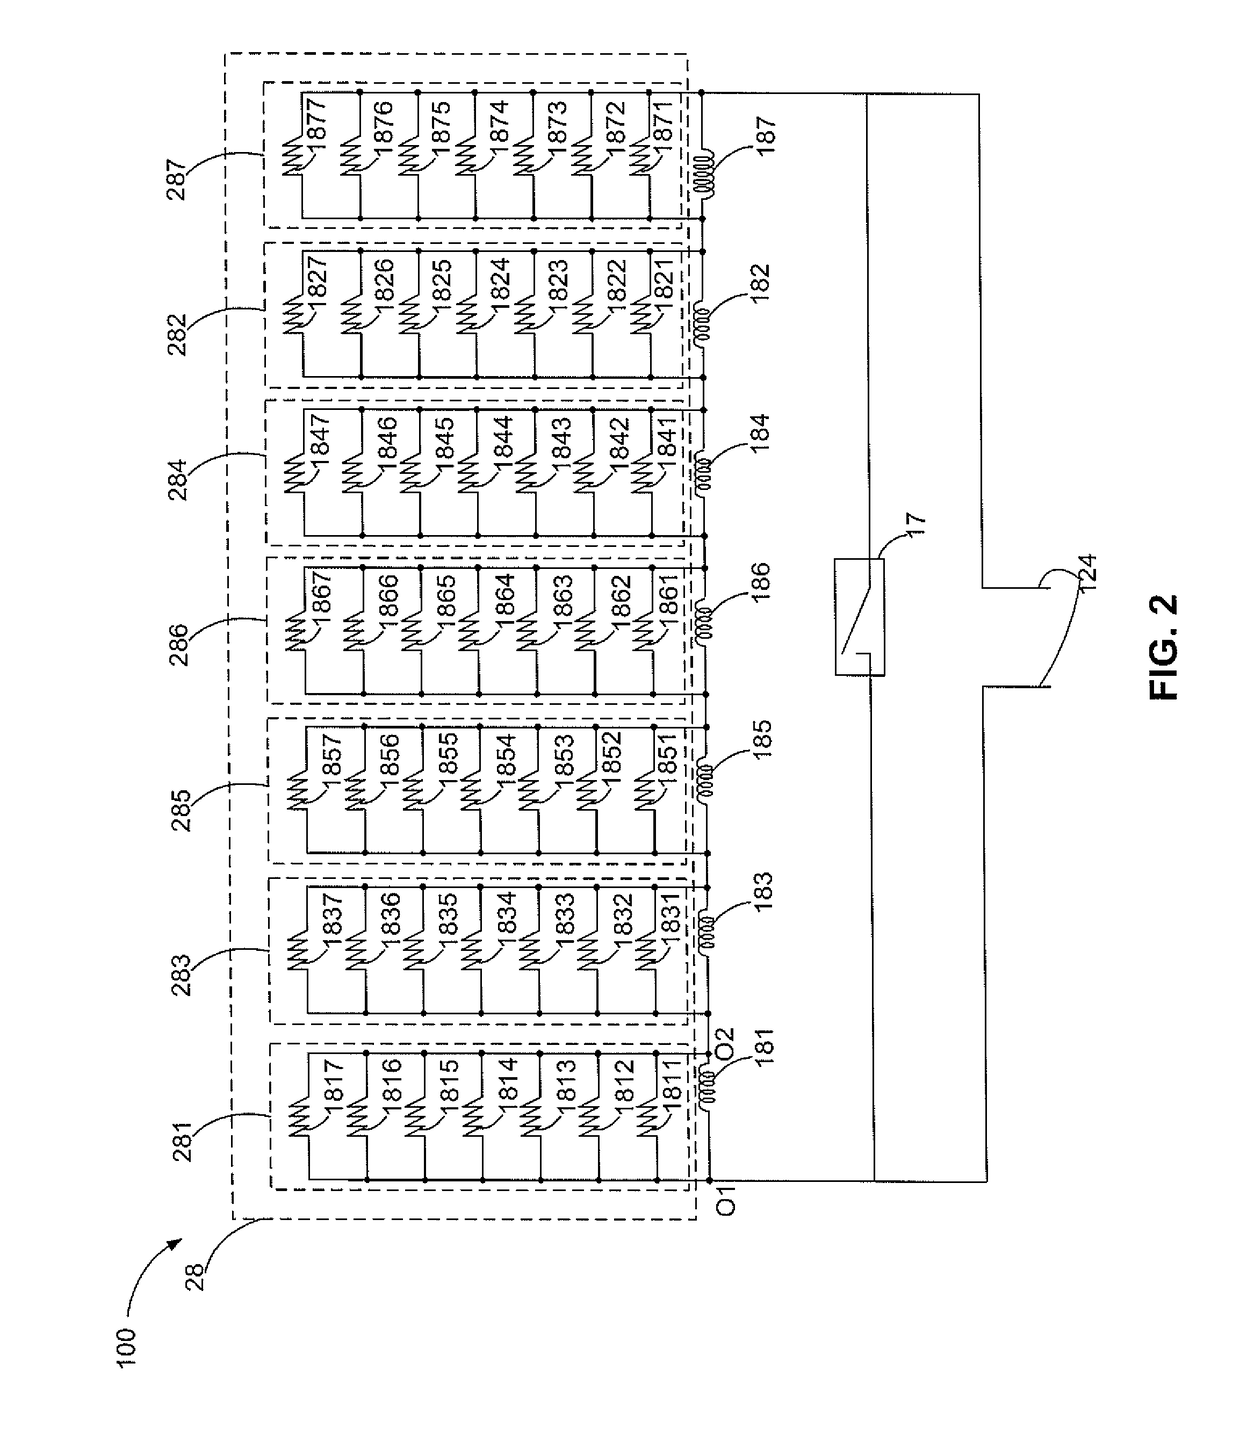 Quench protection apparatus for superconducting magnet system